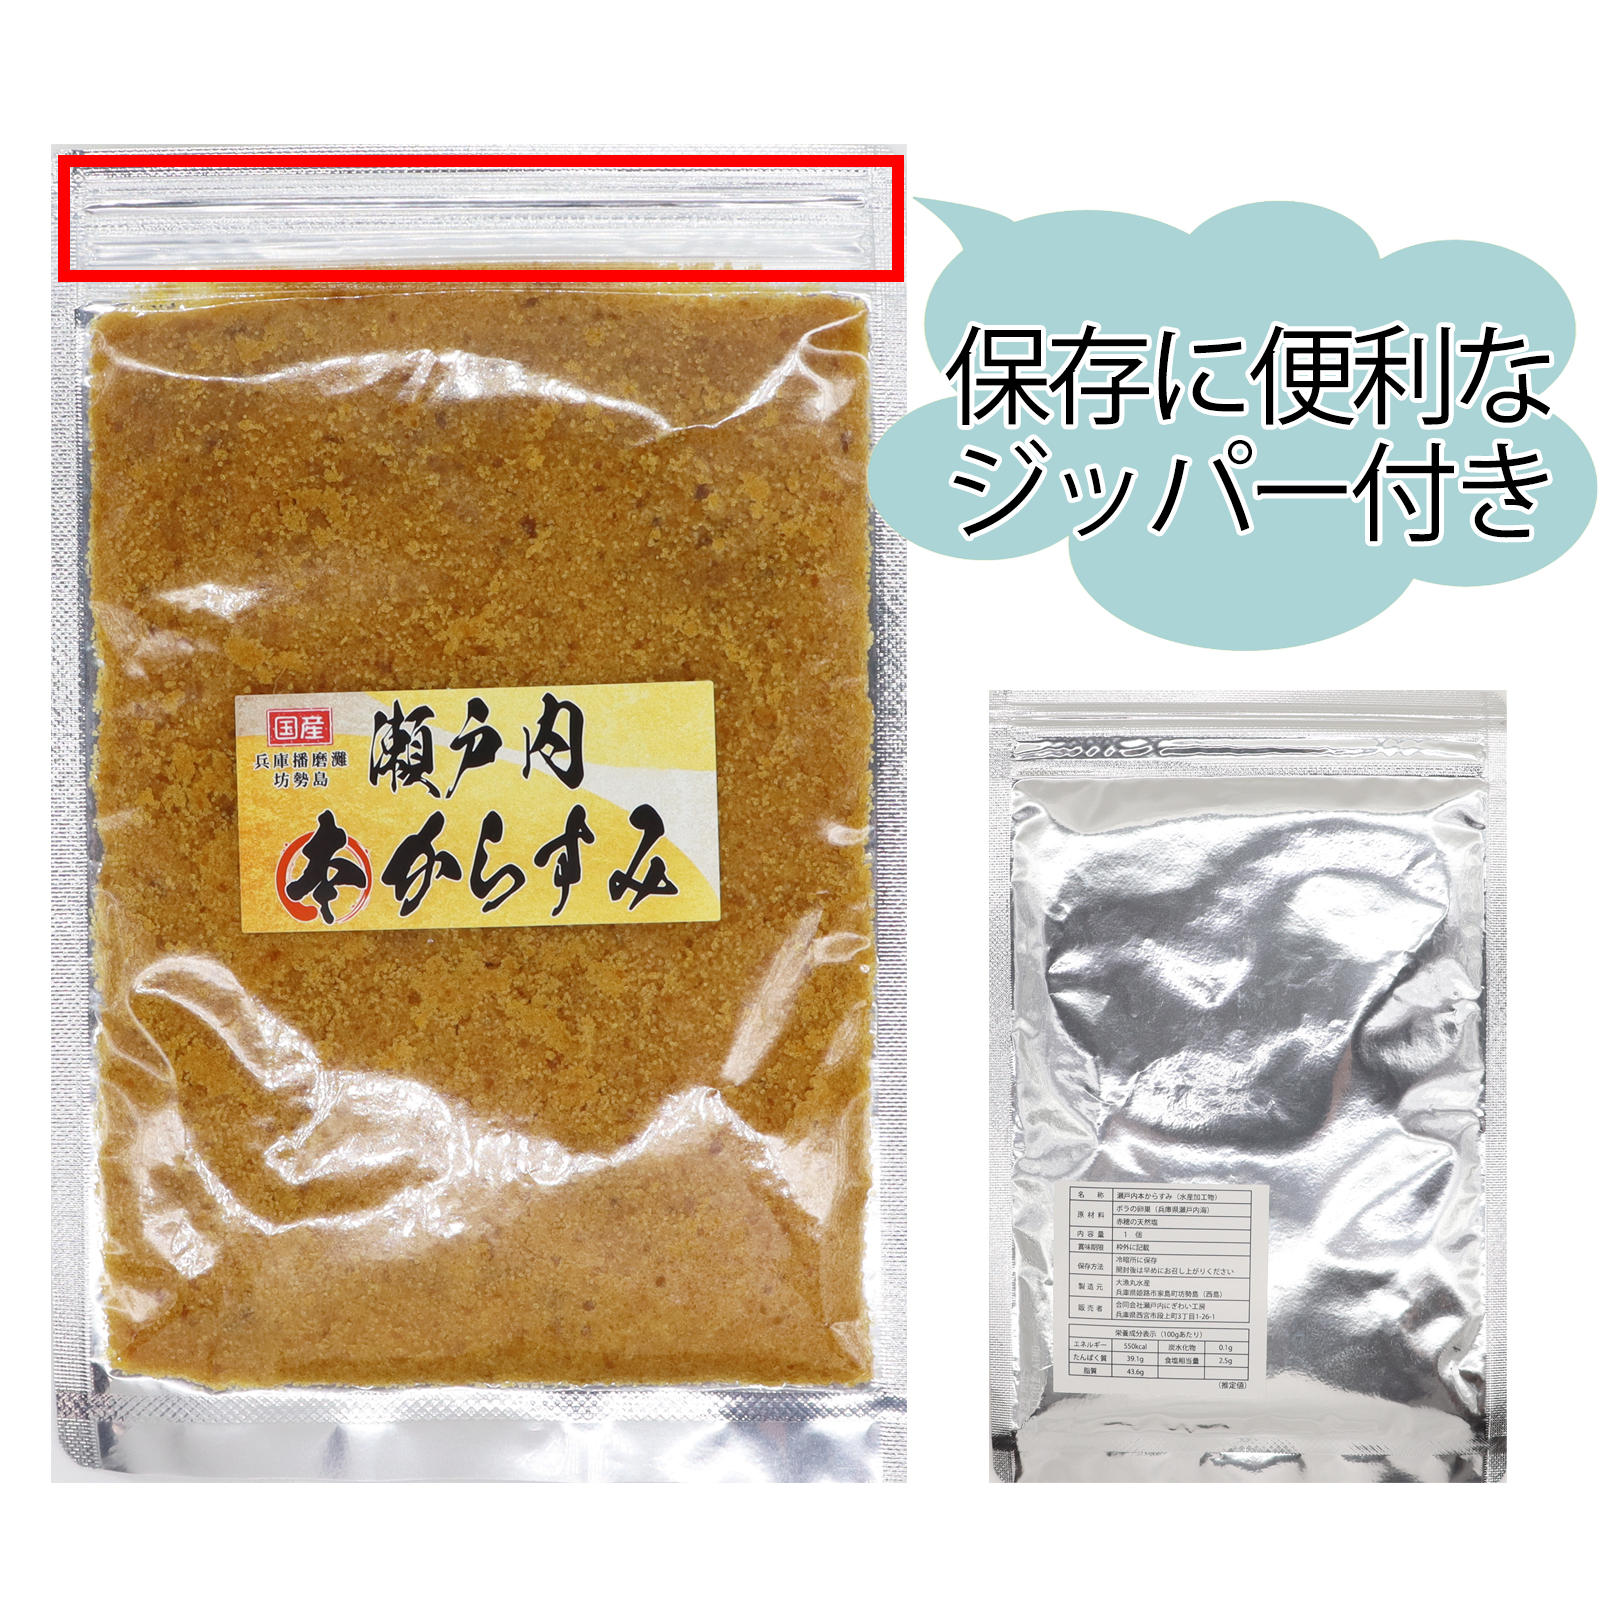  karasumi powder karasumi powder karasumi domestic production no addition 100g×2 pack Seto inside book@ karasumi delicacy . thickness .. taste red .. salt Hyogo Harima . year-end gift gift 